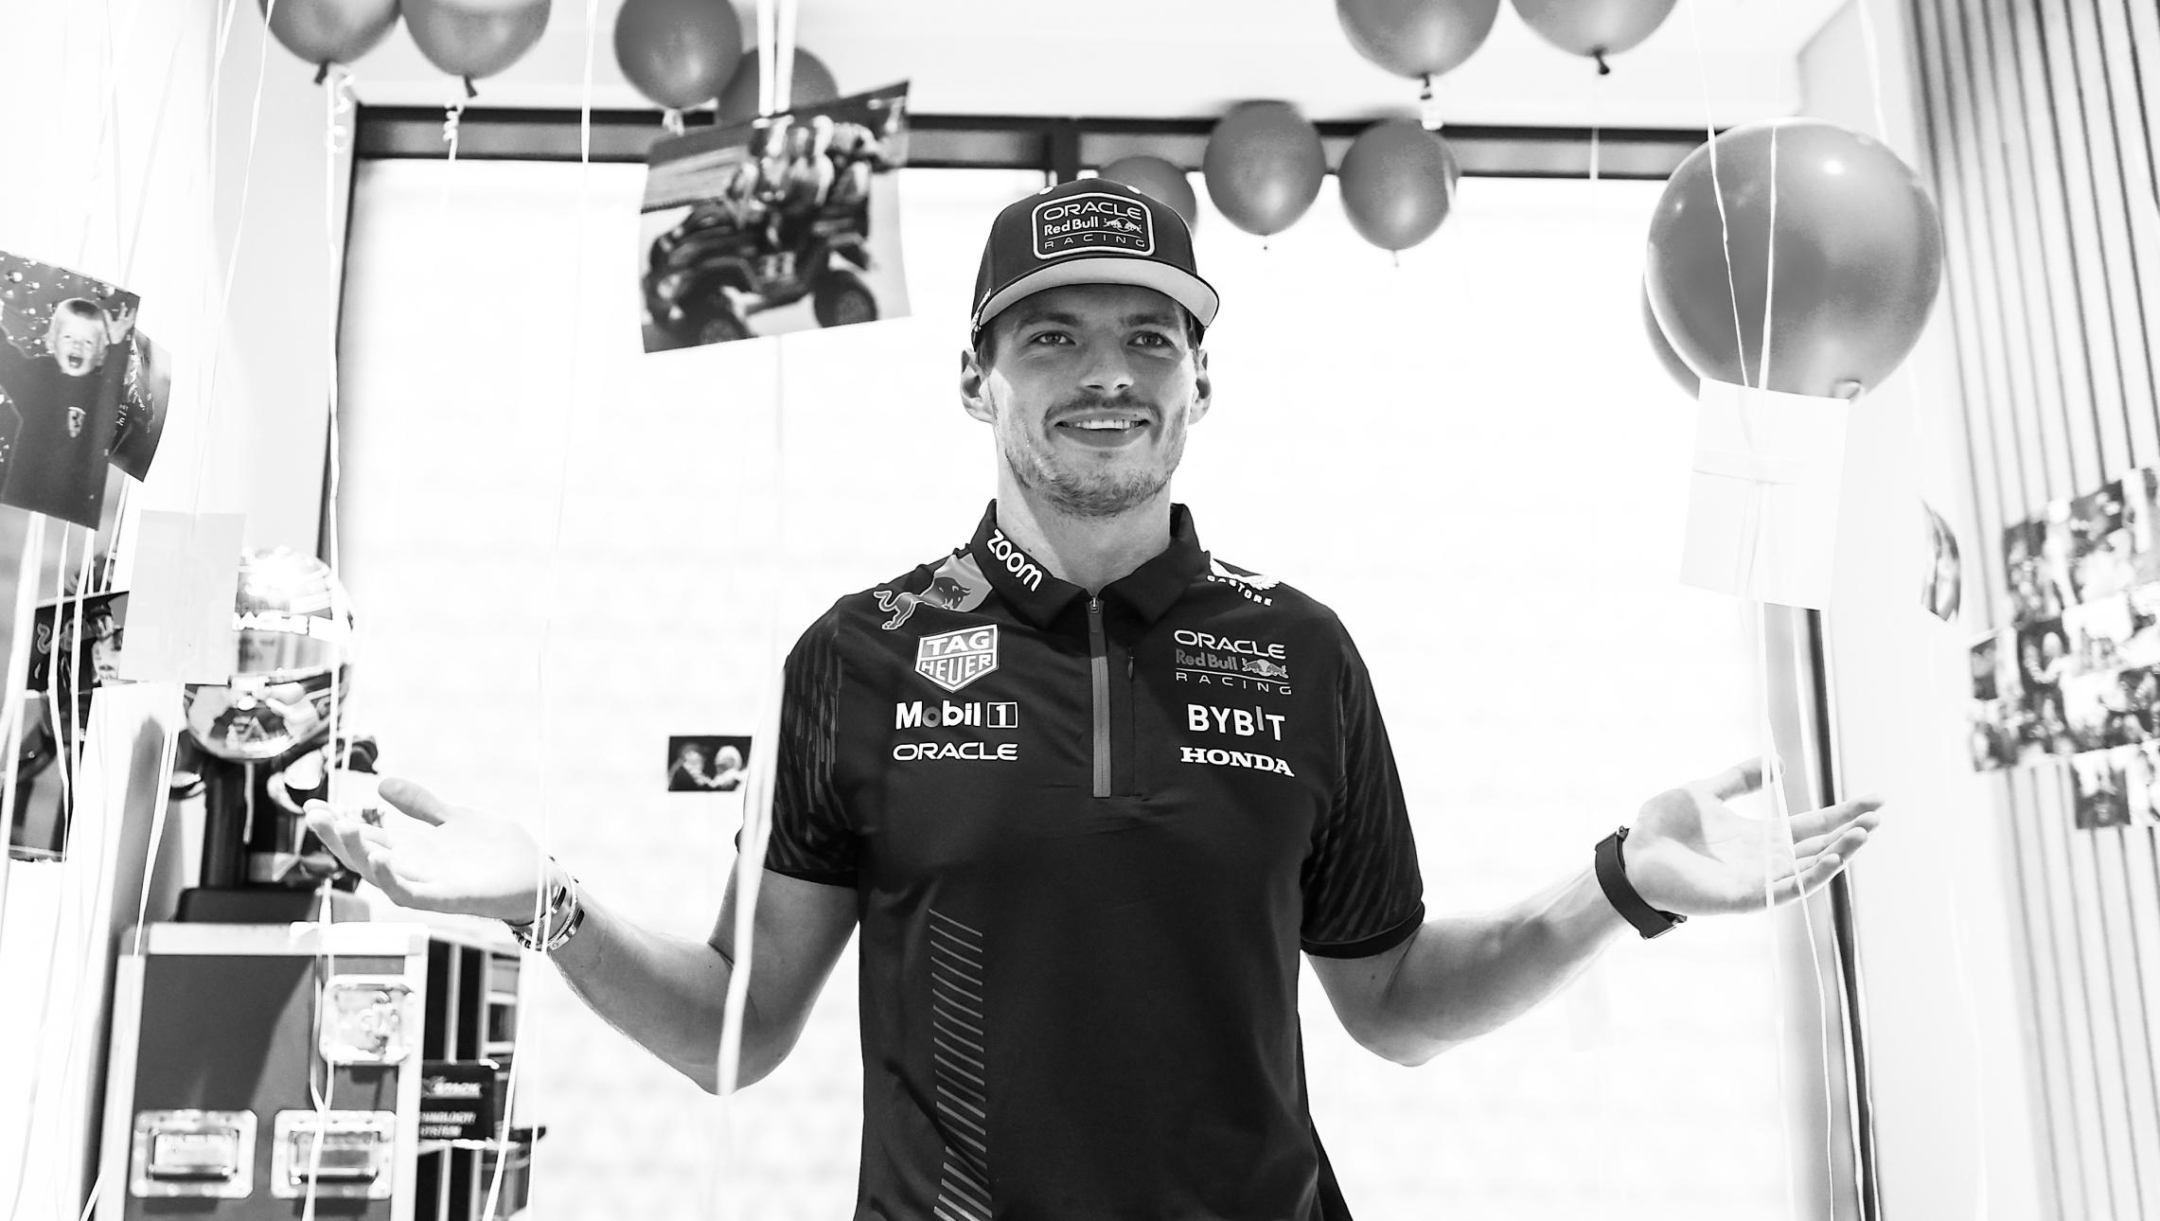 LUSAIL CITY, QATAR - OCTOBER 08: (EDITORS NOTE: Image has been converted to black and white.) 2023 F1 World Drivers Champion Max Verstappen of the Netherlands and Oracle Red Bull Racing poses for a photo in his driver room prior to the F1 Grand Prix of Qatar at Lusail International Circuit on October 08, 2023 in Lusail City, Qatar. (Photo by Mark Thompson/Getty Images)